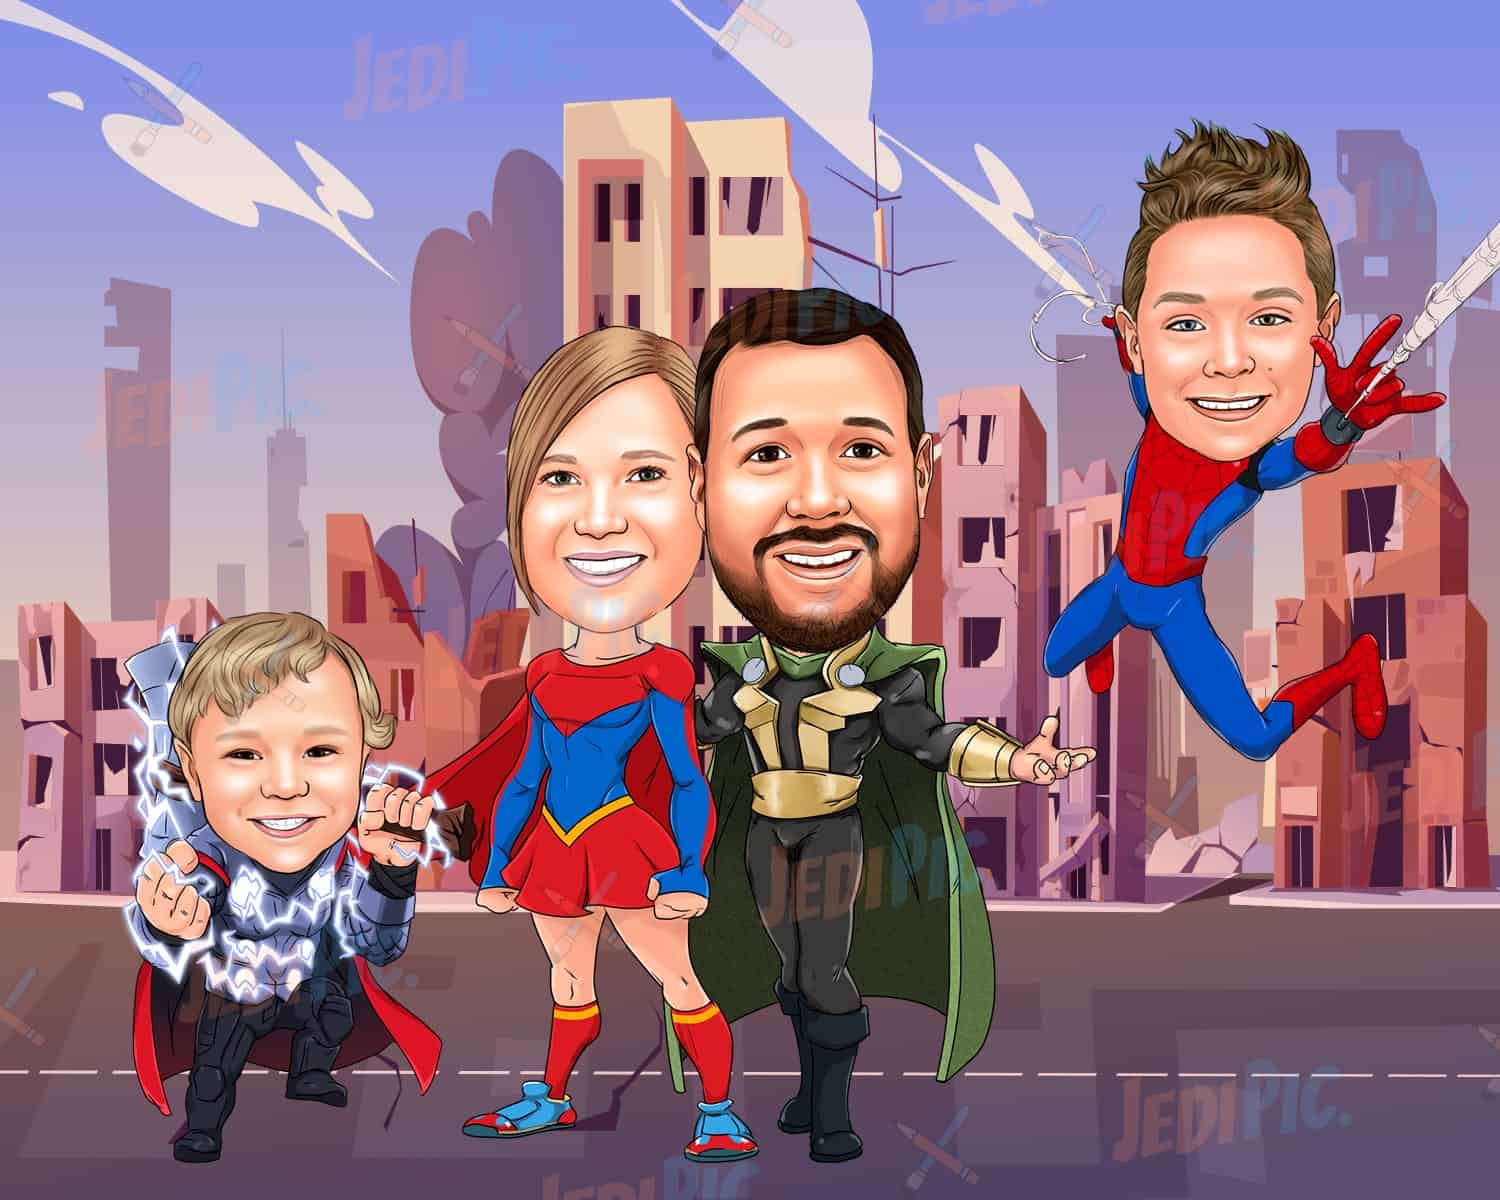 Superfamily Cartoon Portrait in Color Style